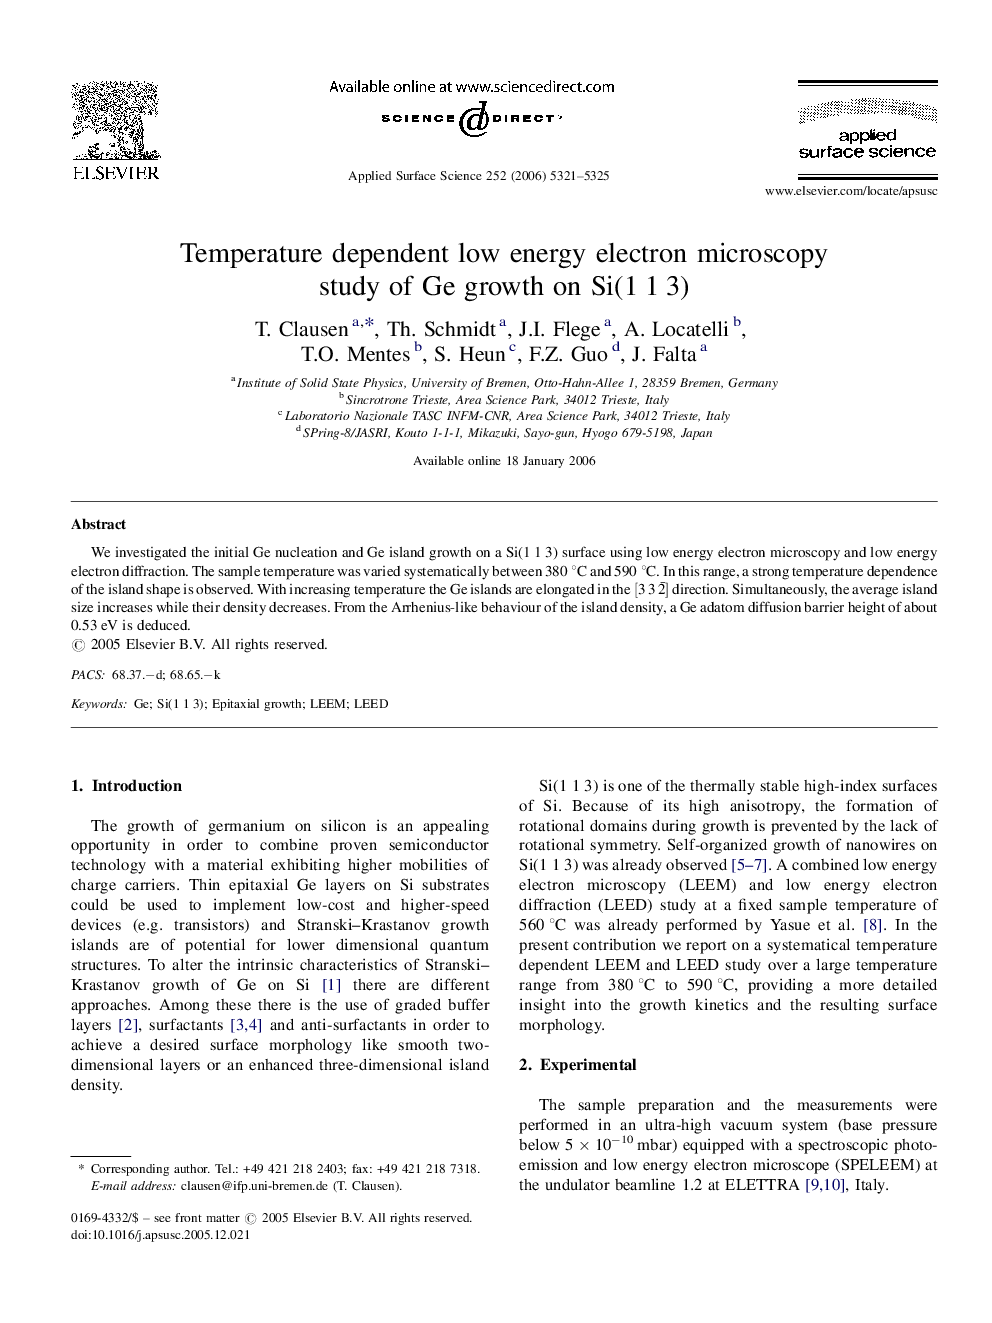 Temperature dependent low energy electron microscopy study of Ge growth on Si(1 1 3)